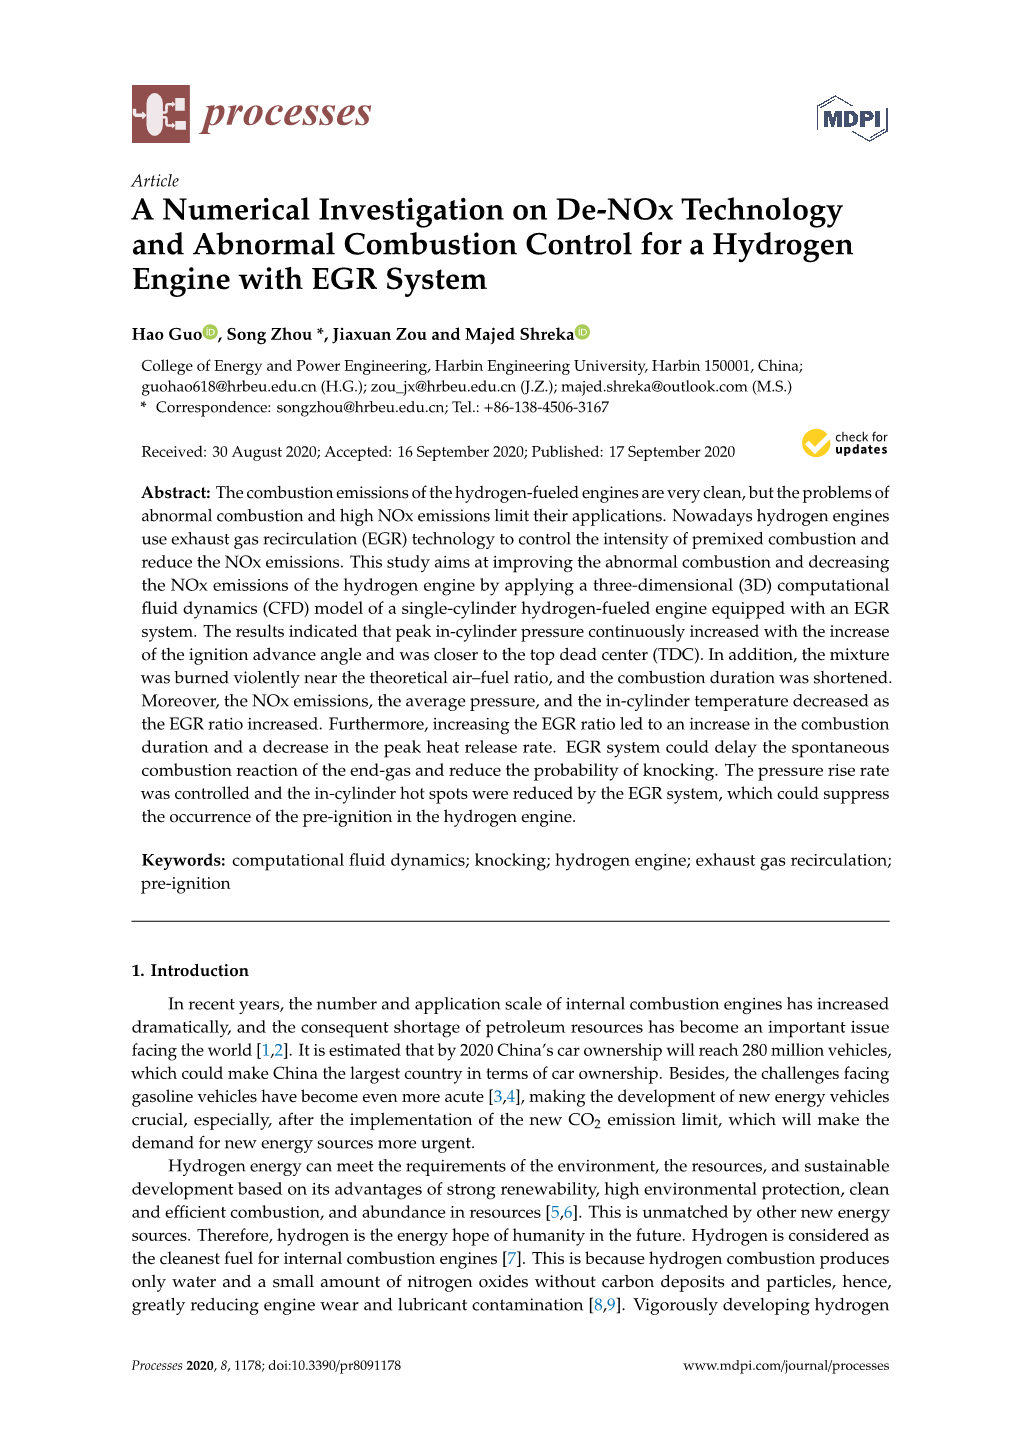 A Numerical Investigation on De-Nox Technology and Abnormal Combustion Control for a Hydrogen Engine with EGR System